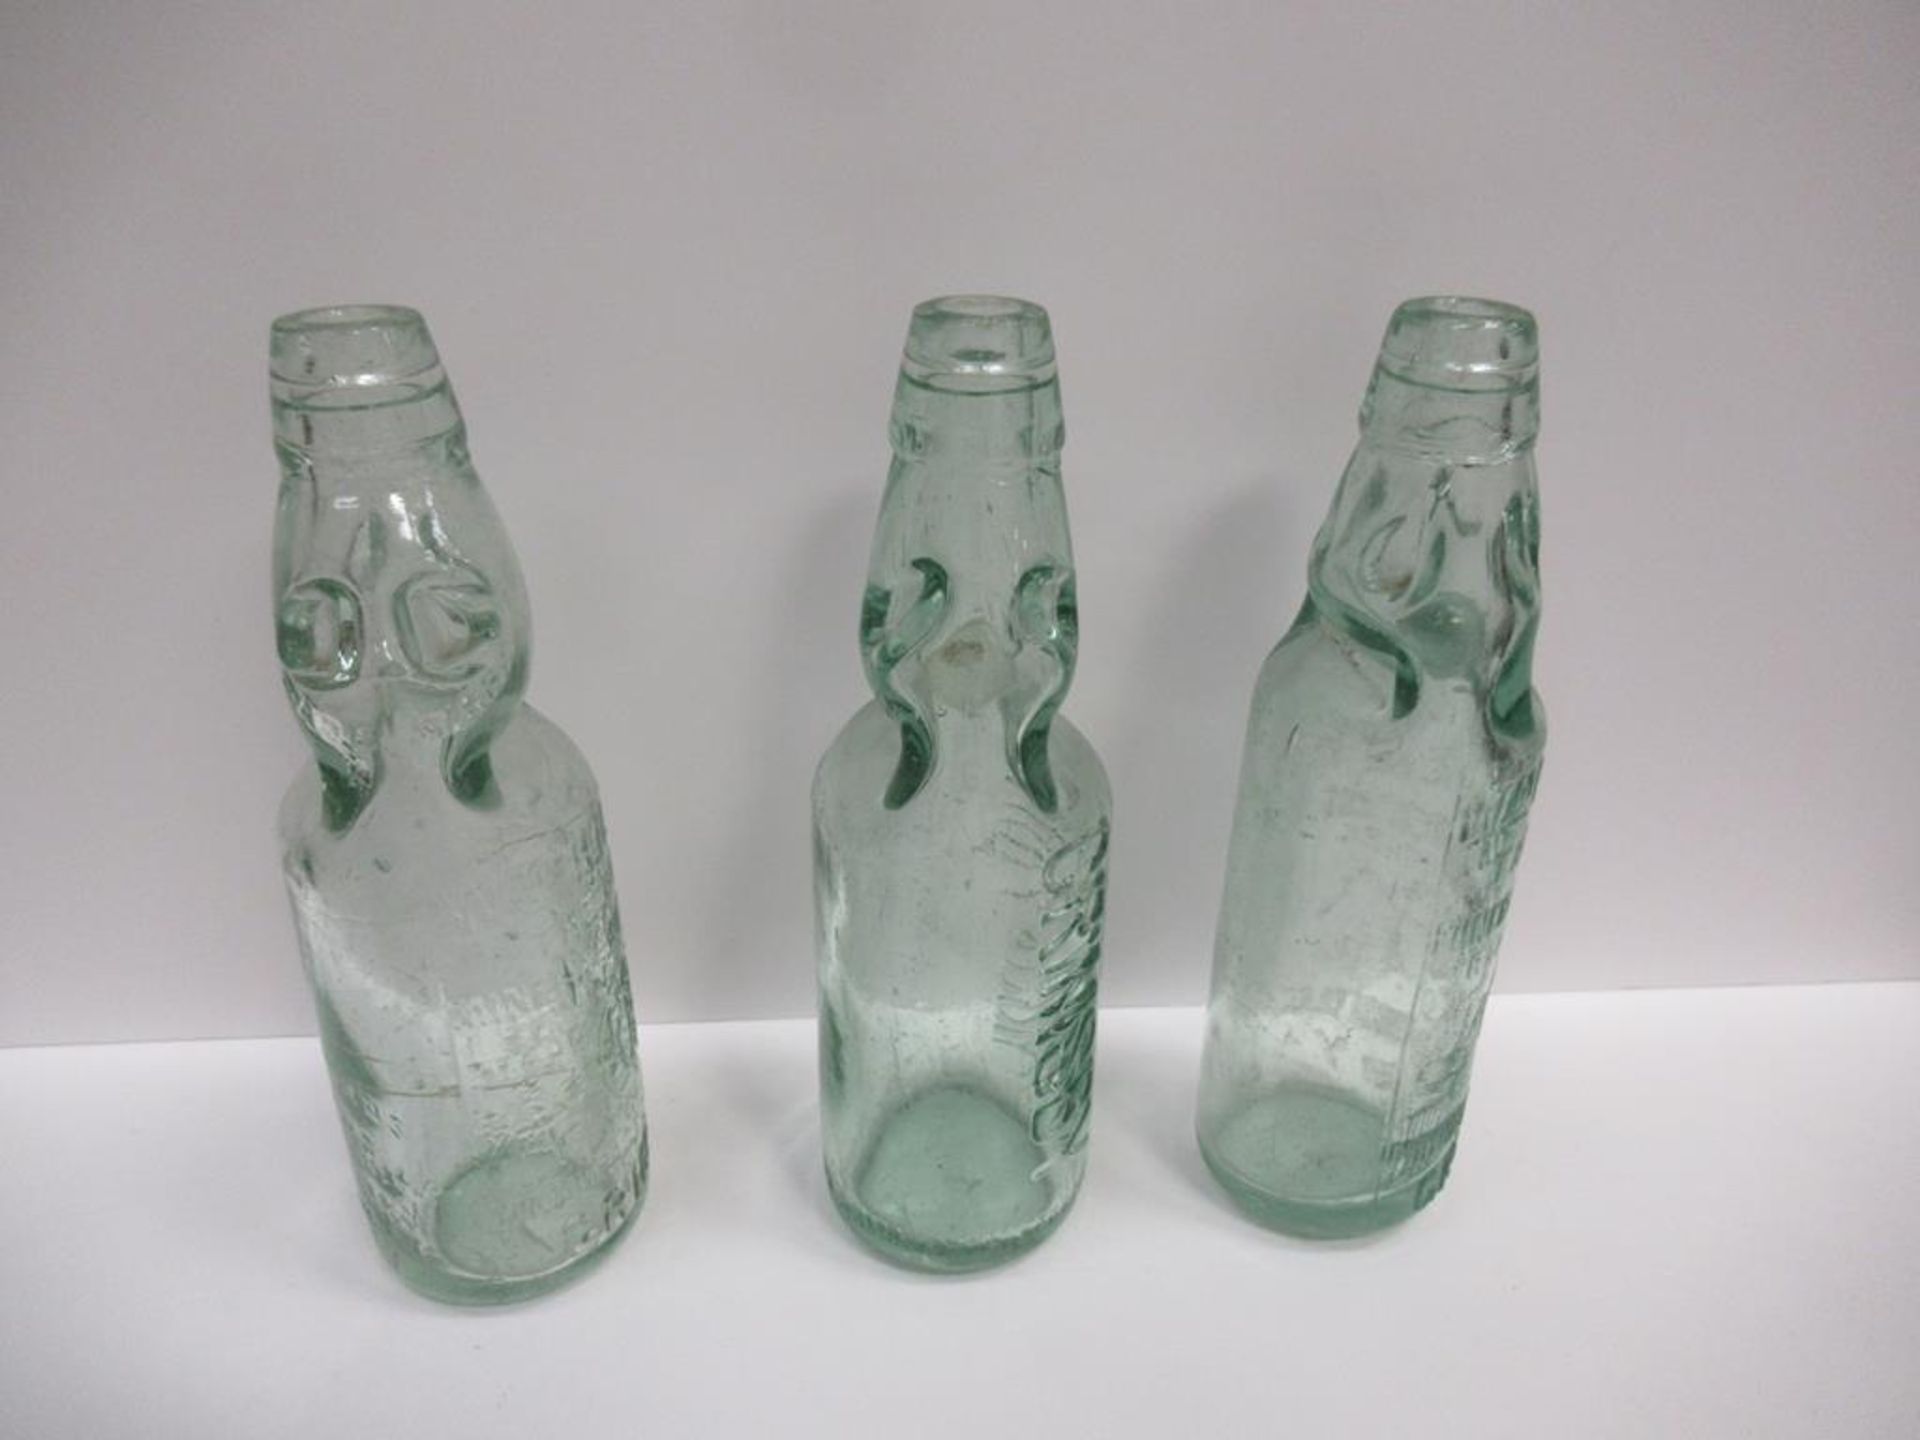 6x Grimsby W.M Hill & Co (4) and W. Hill & Son (2) Codd bottles - Image 13 of 21